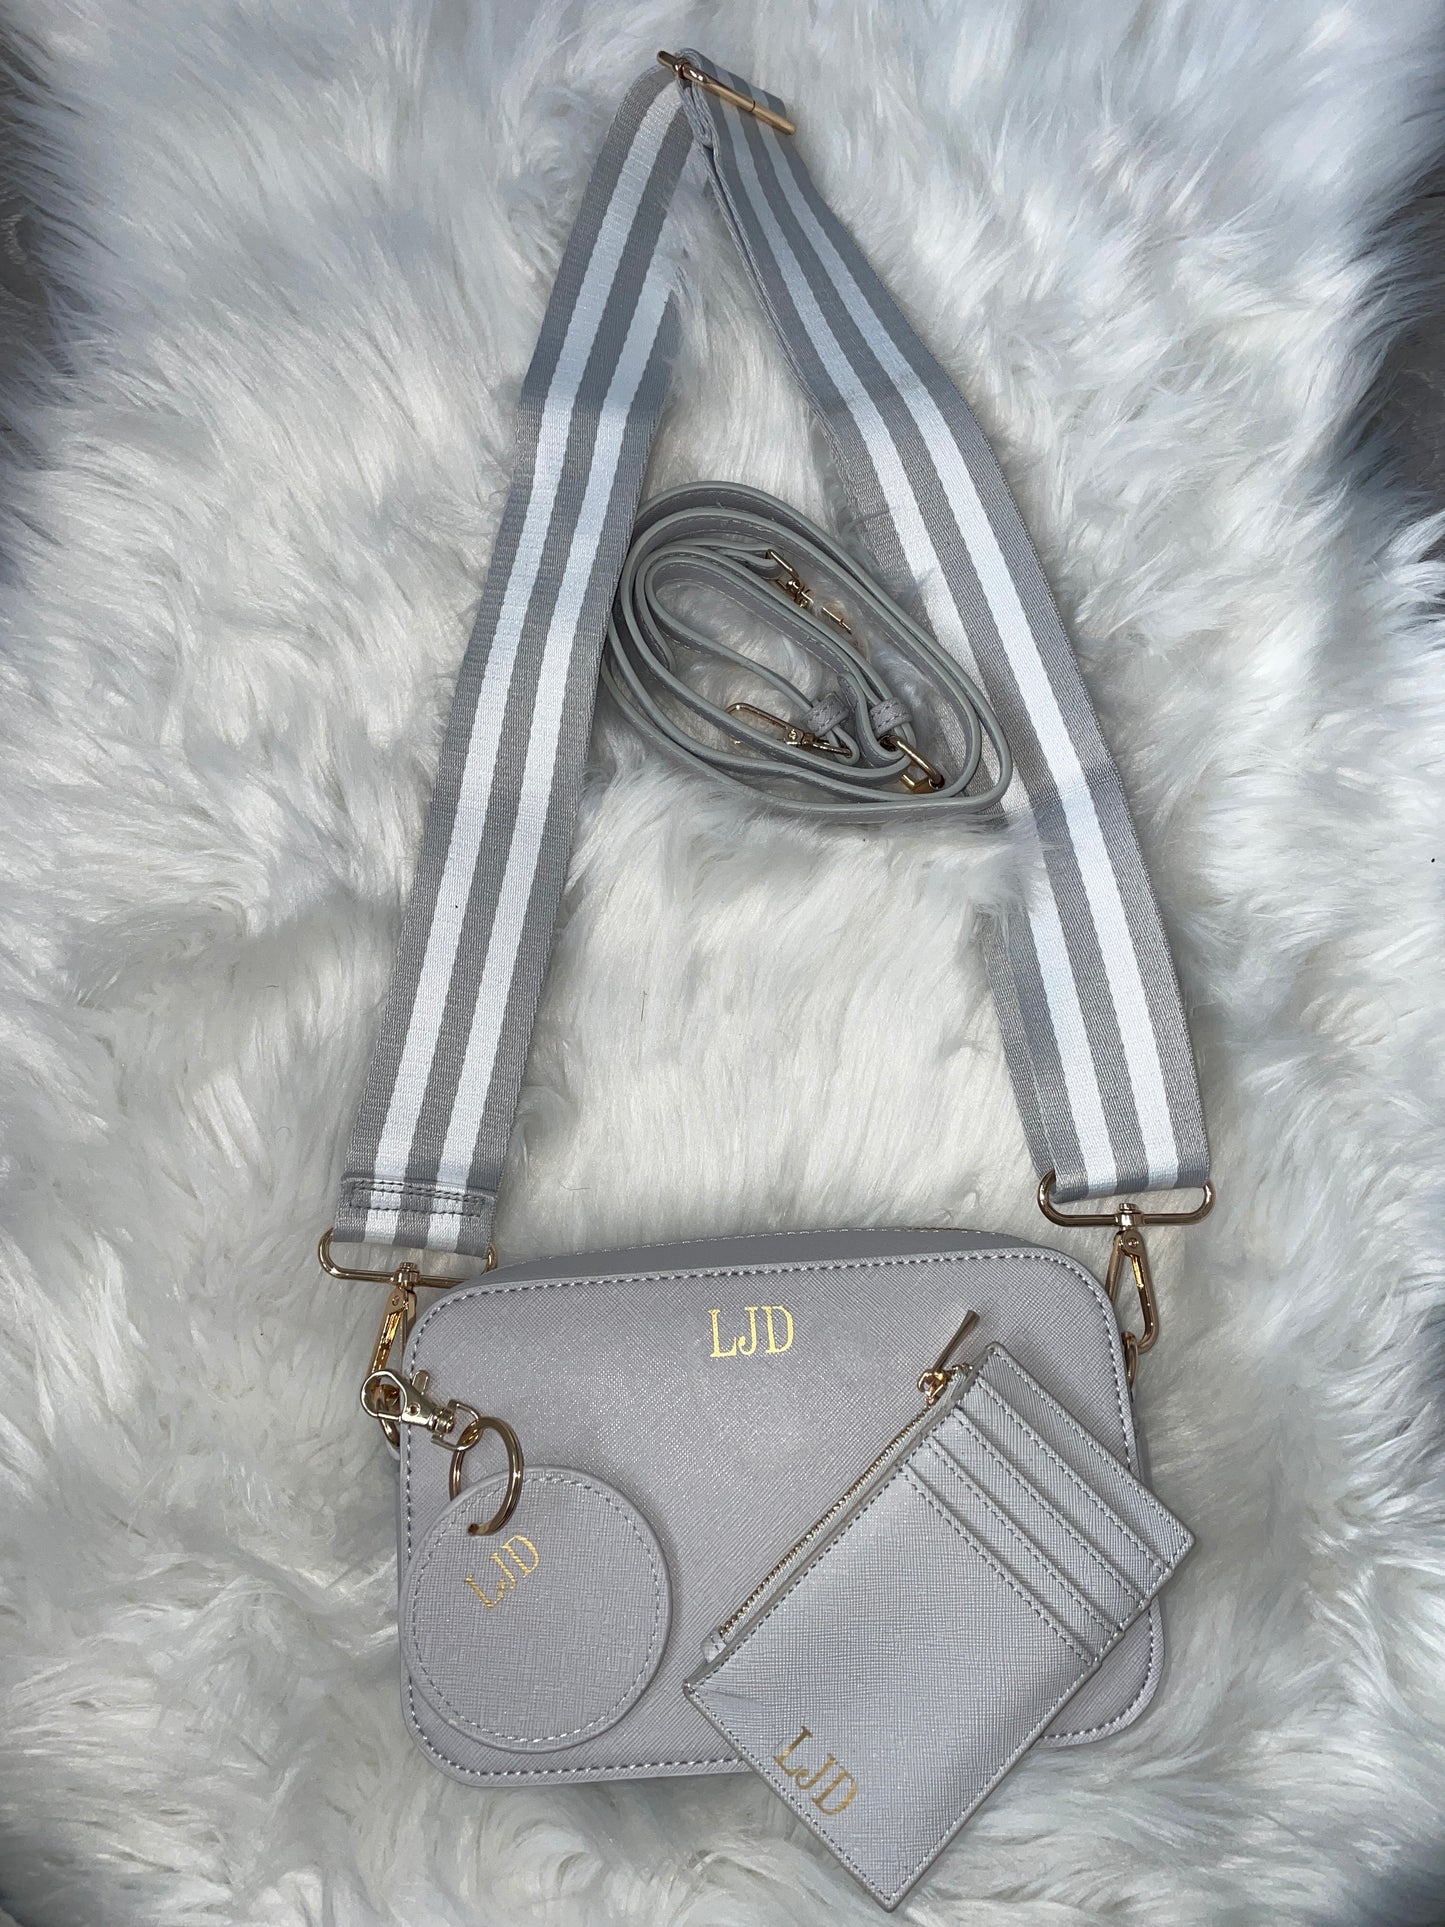 Personalised Initial / Name Cross Body Saffiano Fine Grain Leather Look Cross Body Bag Set - Bag, Strap, Keyring & Purse